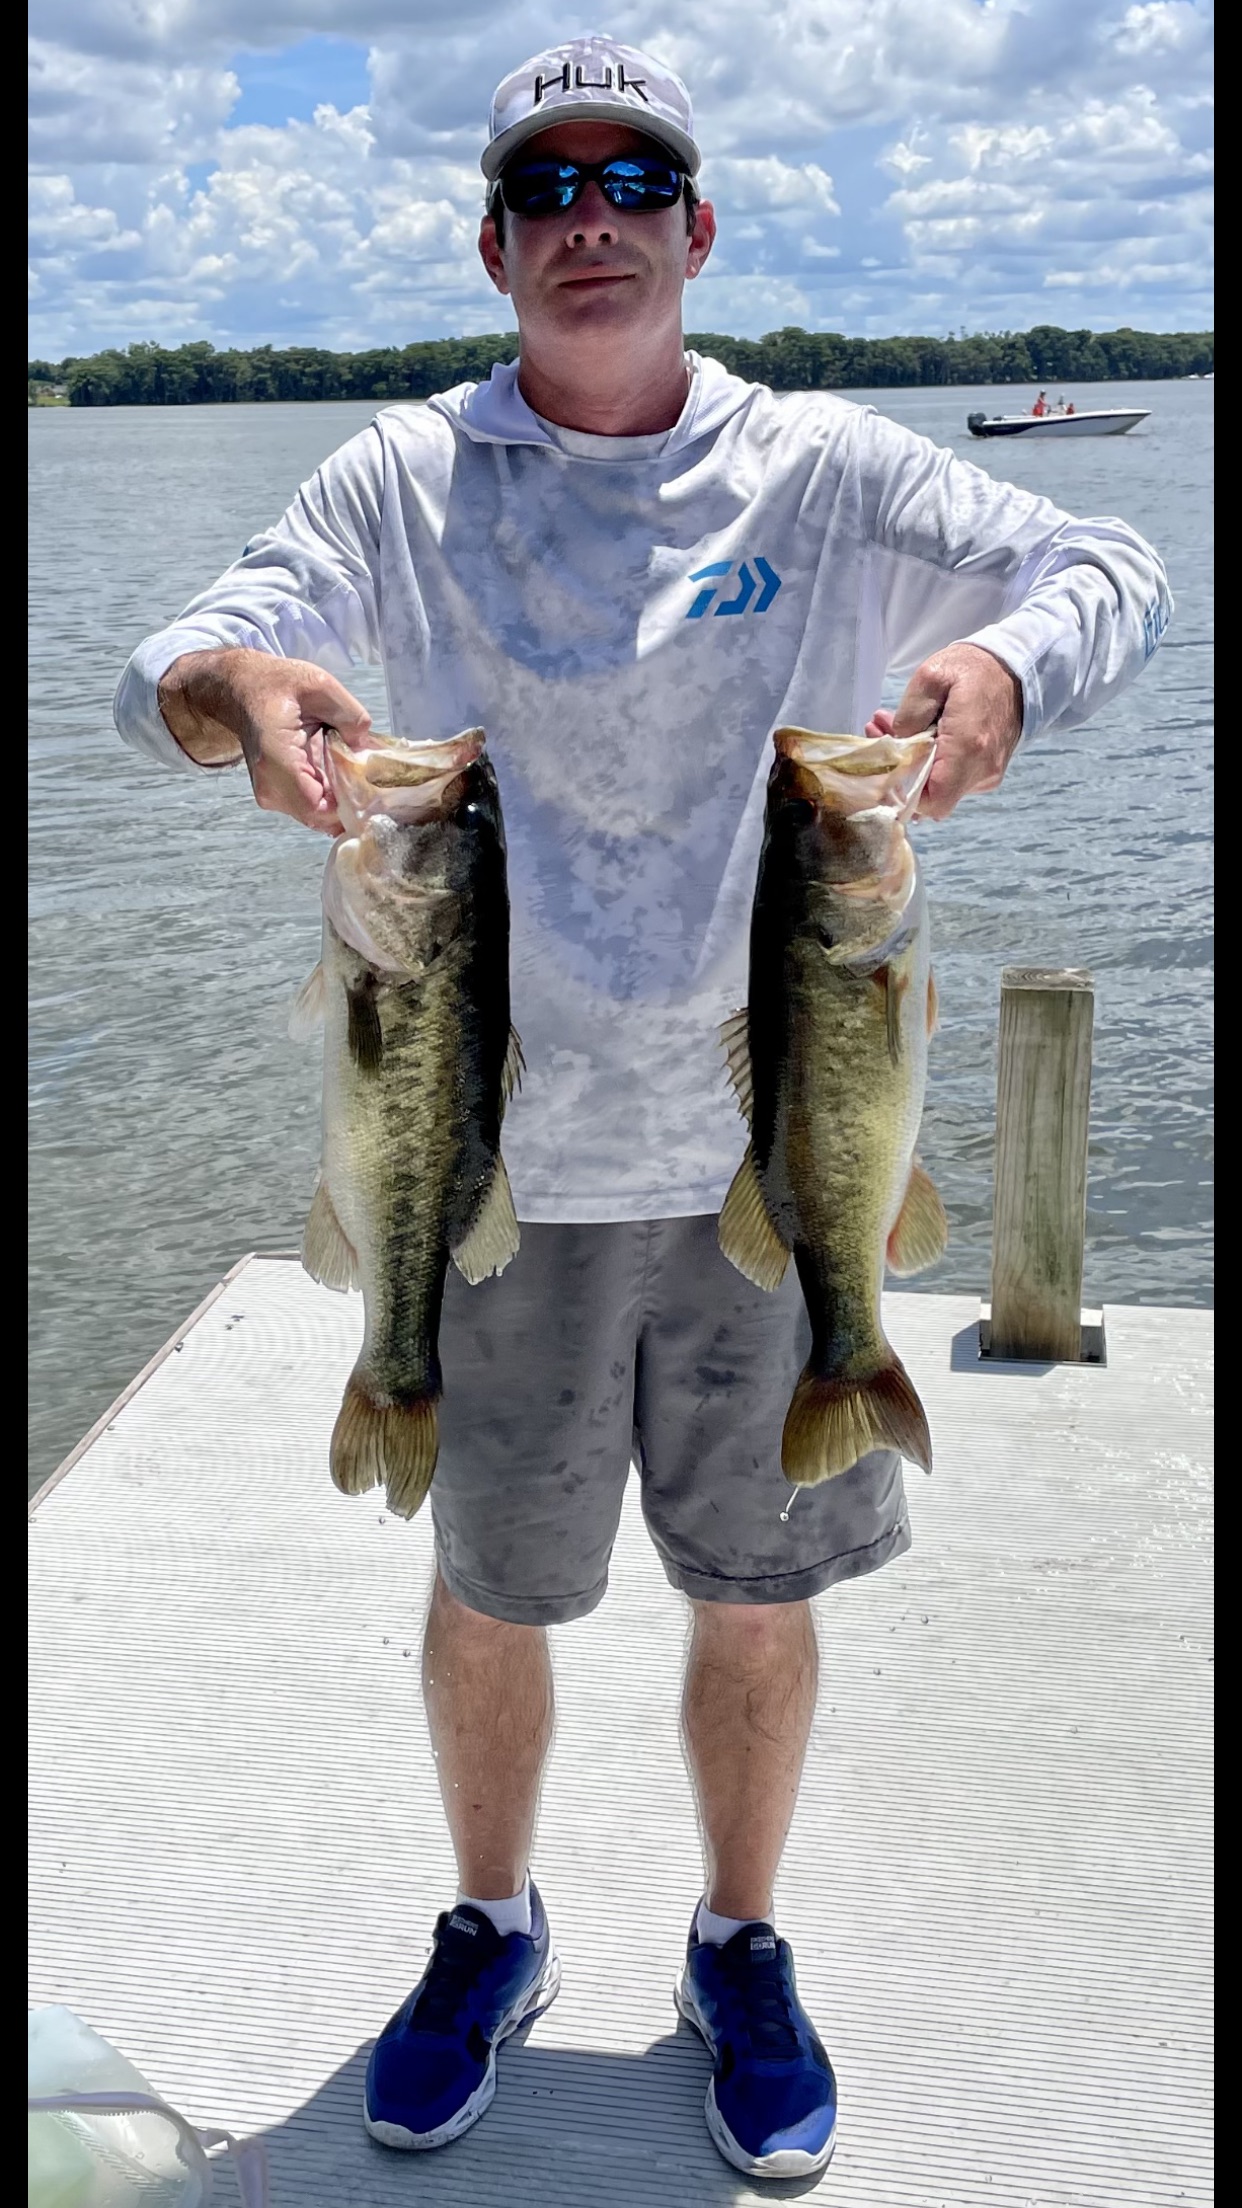 Chris Cardamone - 1st Place Angler - Lake Harris only - July 2021